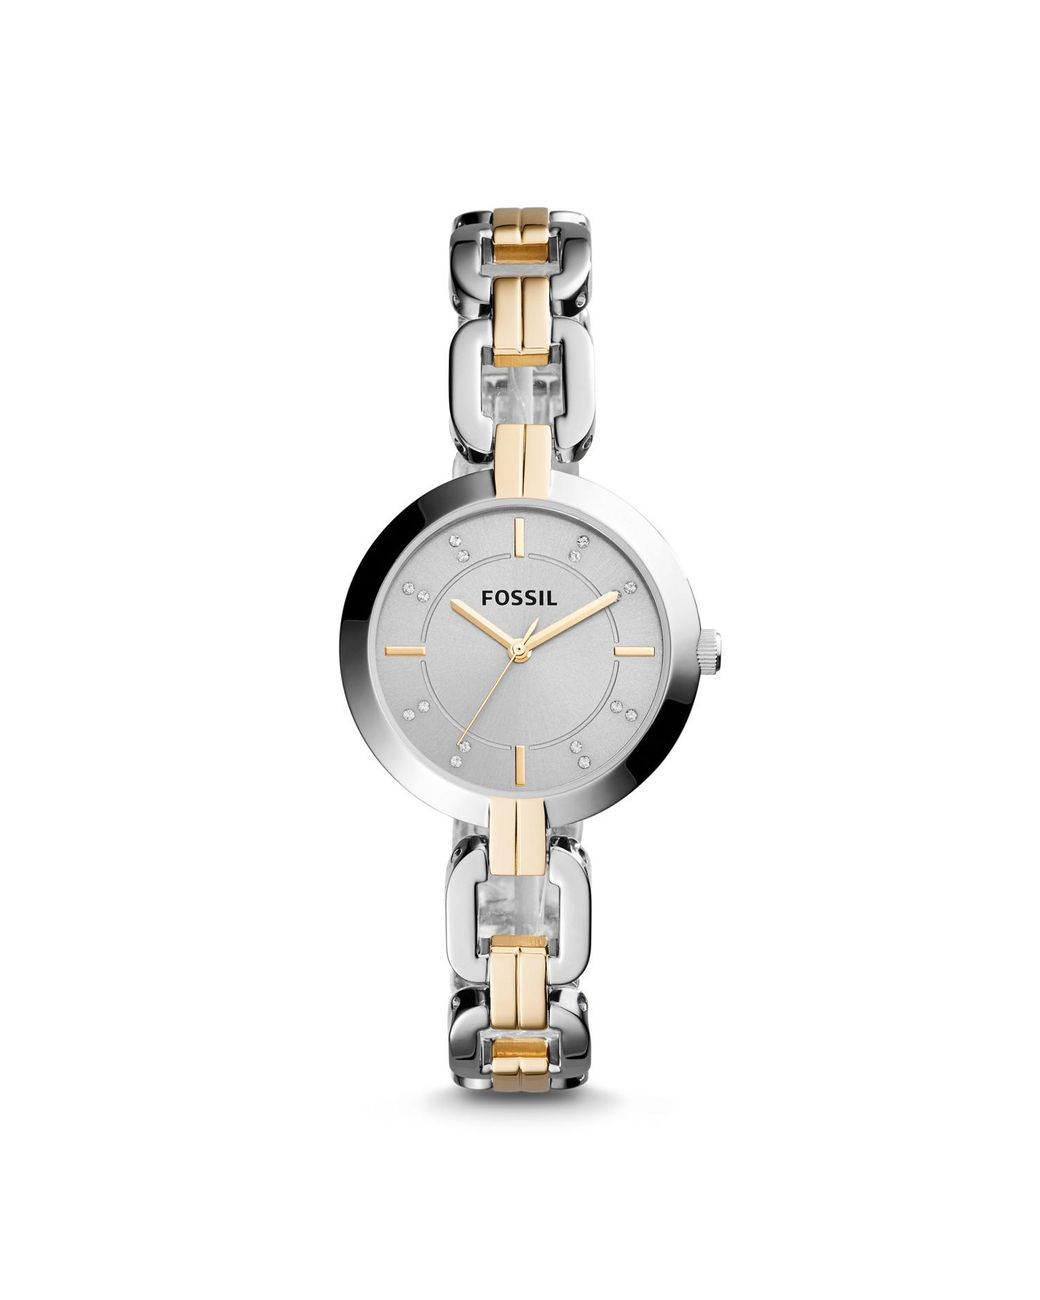 Fossil Kerrigan Three-hand Two-tone Stainless Steel Watch Jewelry - Lyst Kerrigan Three Hand Two Tone Stainless Steel Watch